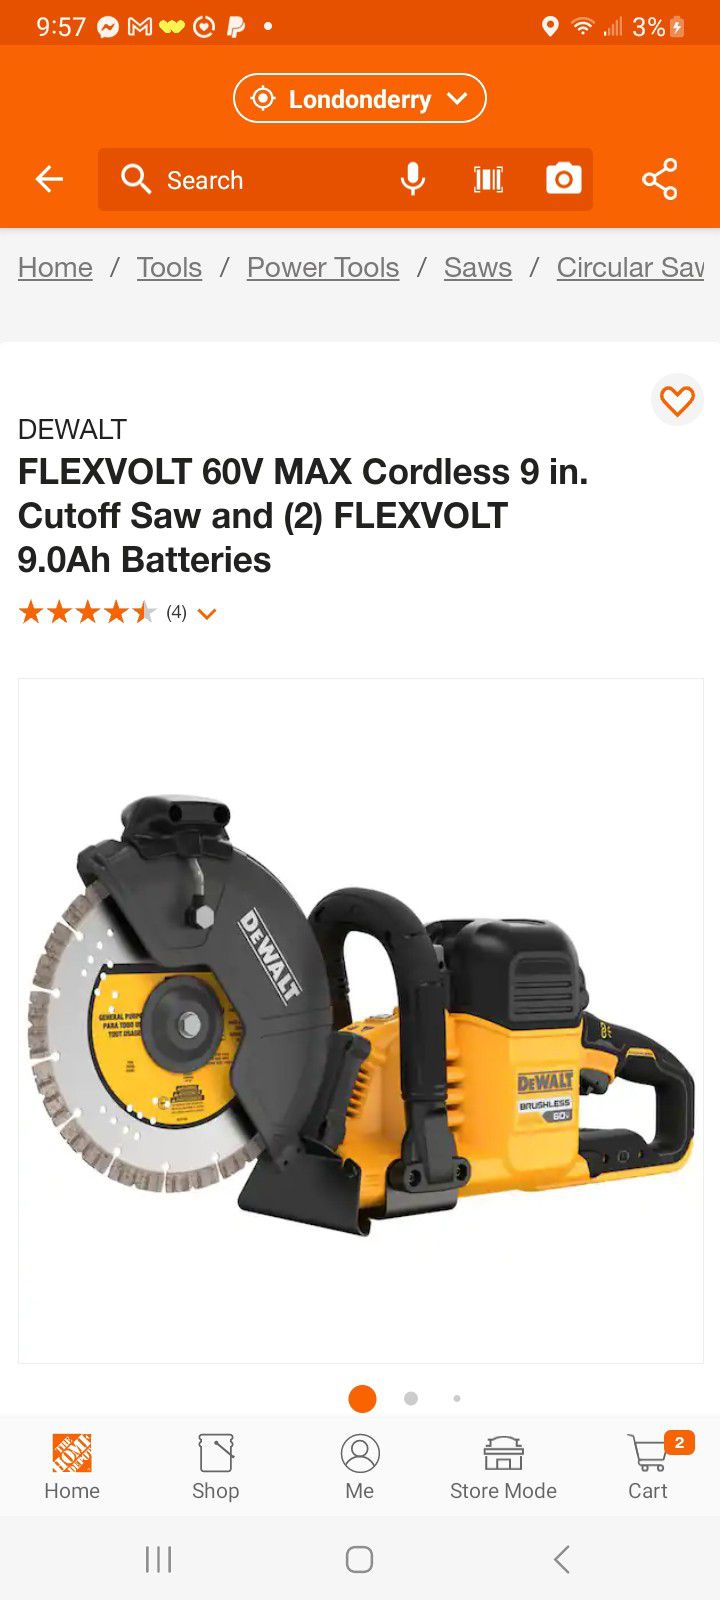 FLEXVOLT 60V MAX Cordless 9 in. Cutoff Saw and (2) FLEXVOLT 9.0Ah Batteries

 Comes With 150$ Gift Card To Home Depot Also